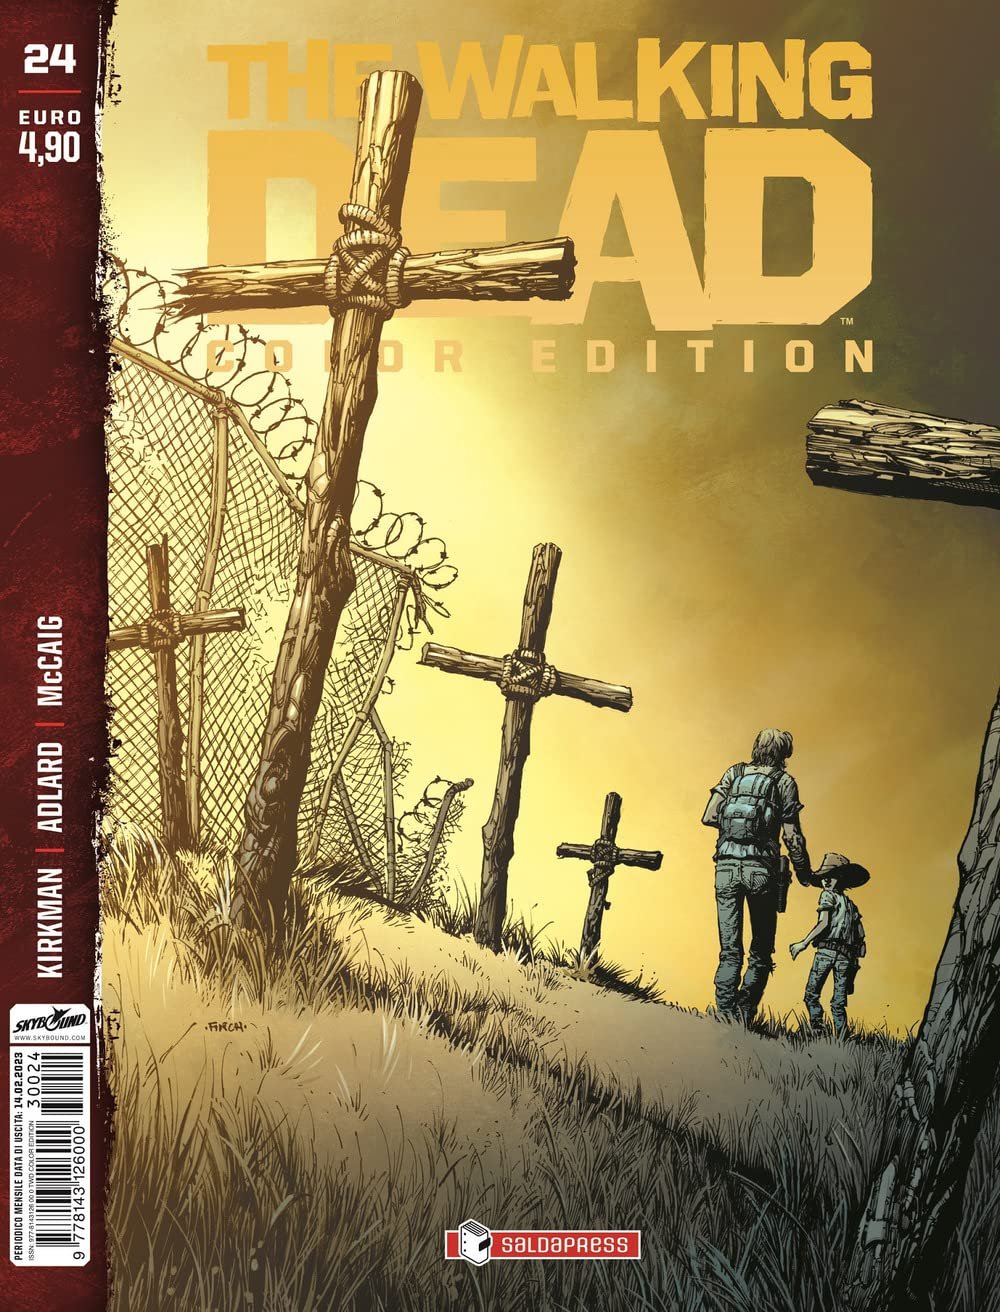 THE WALKING DEAD COLOR EDITION N. 24